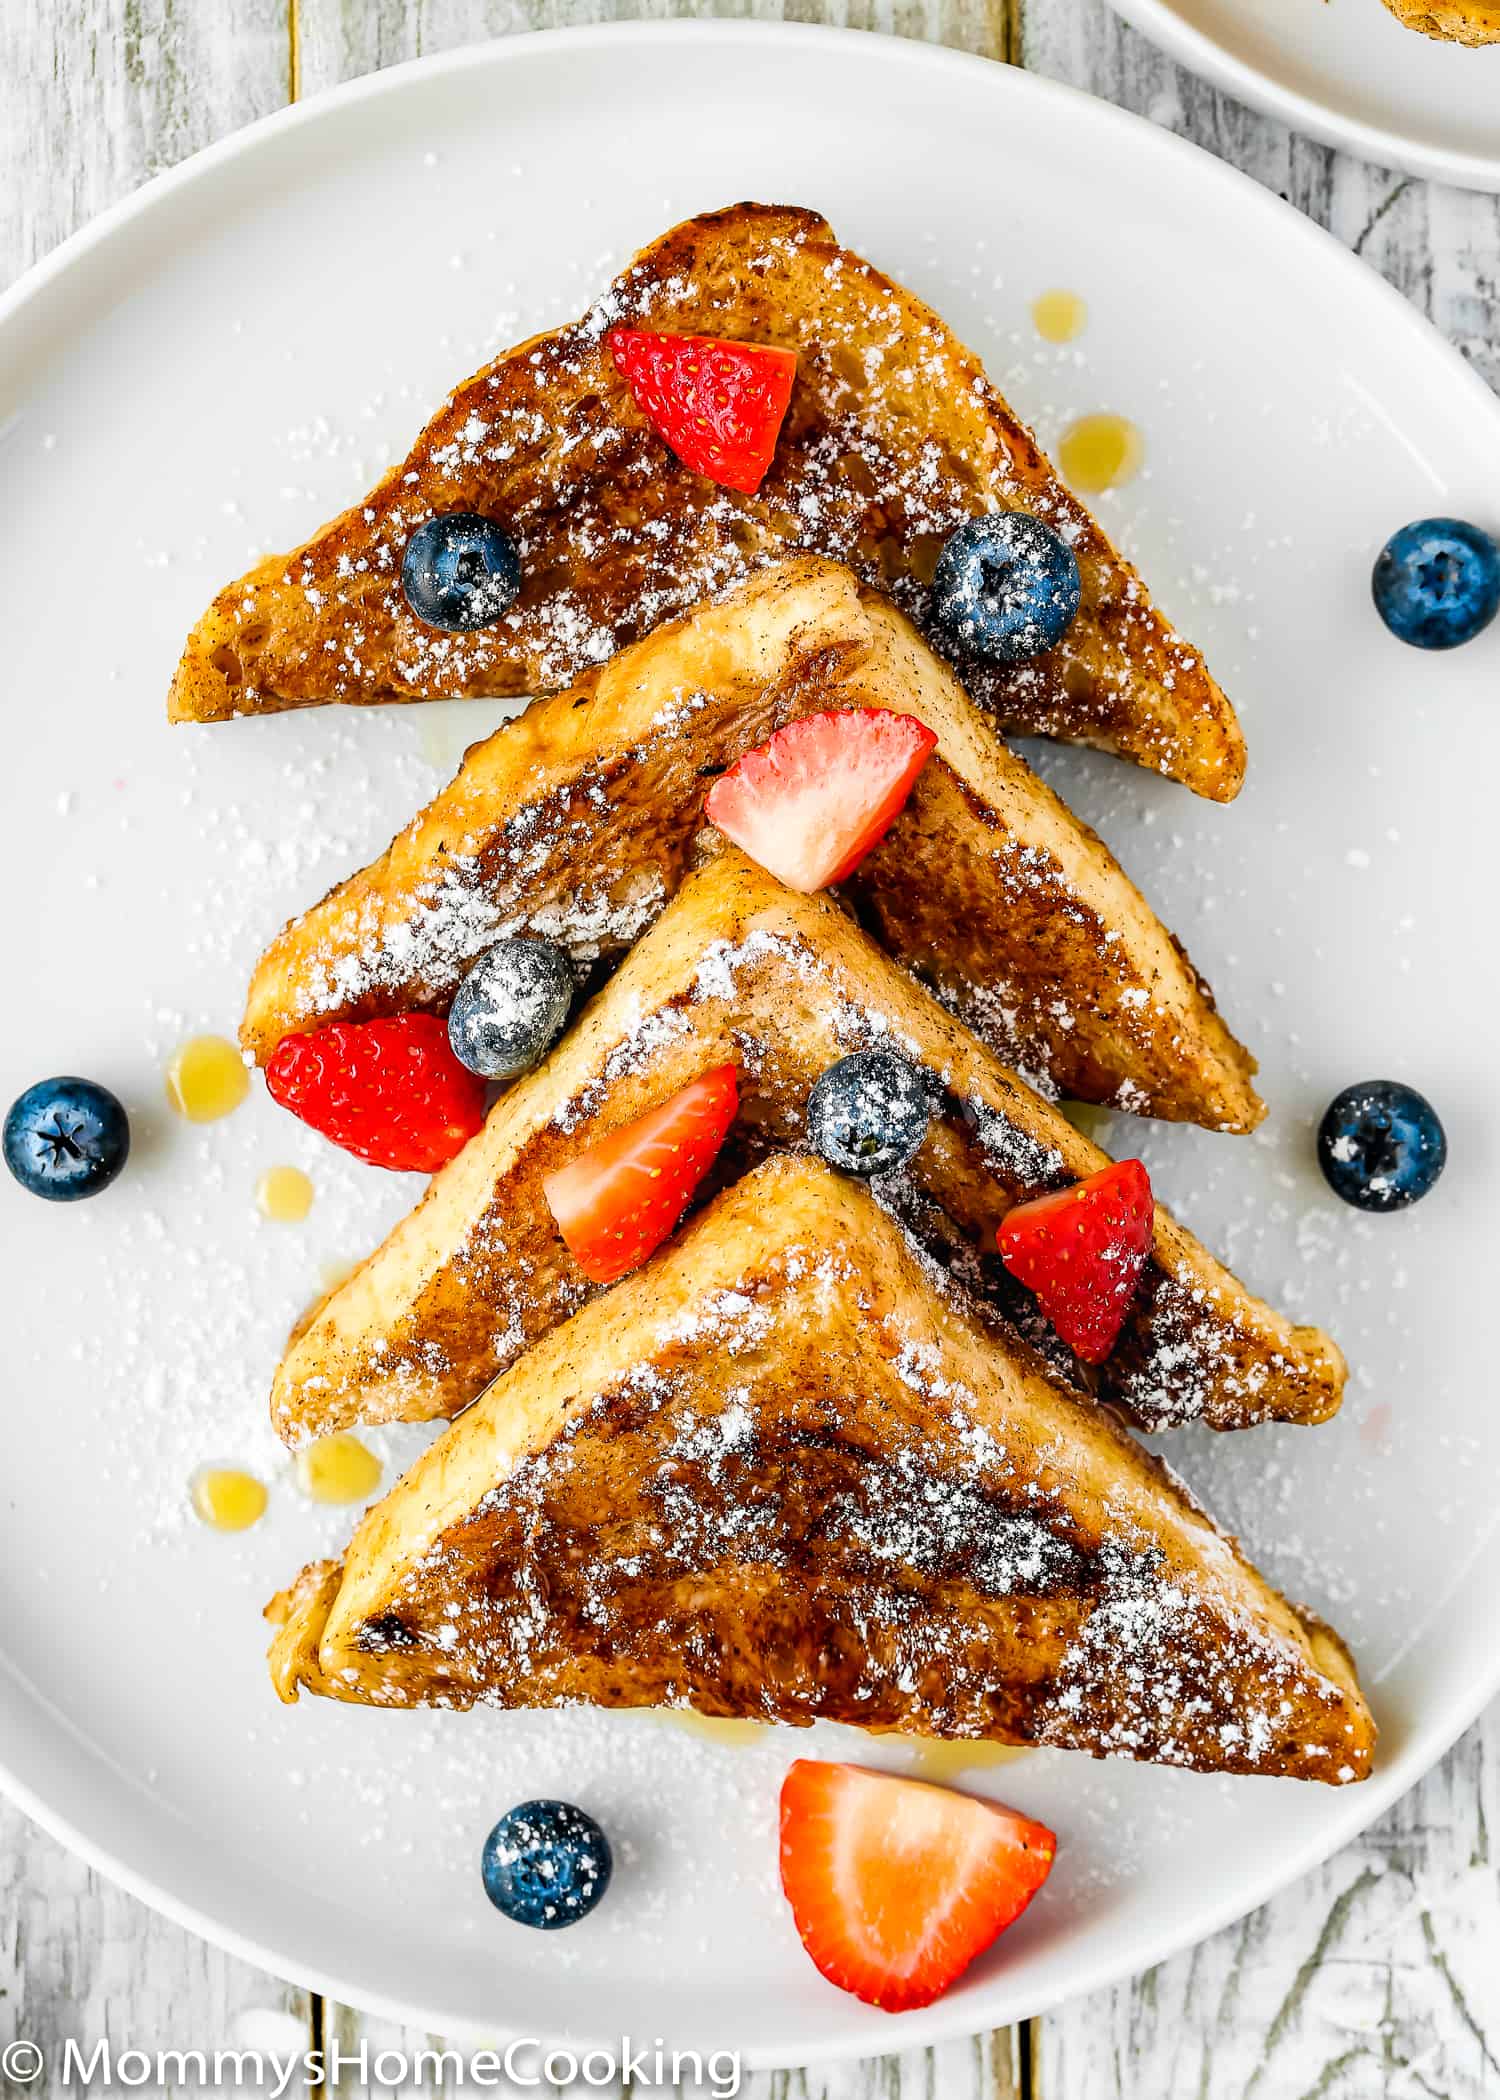 A platter of French toast cut into triangles, with fresh fruit and maple syrup on top.